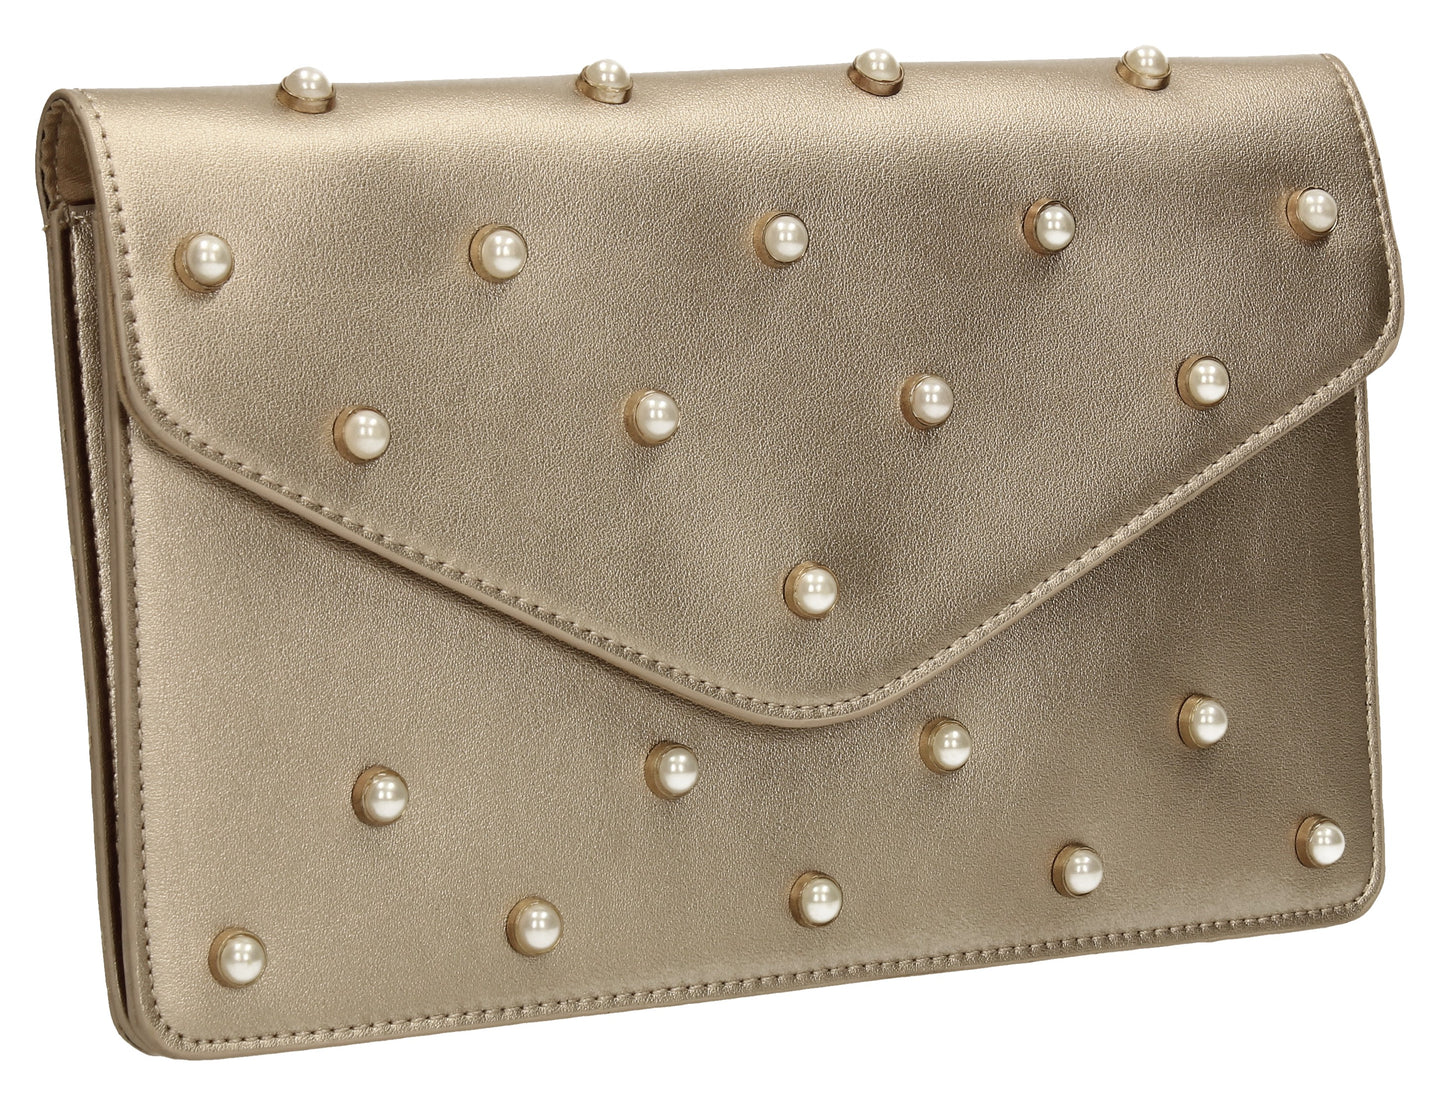 SWANKYSWANS Emily Pearl Clutch Bag Champagne Cute Cheap Clutch Bag For Weddings School and Work